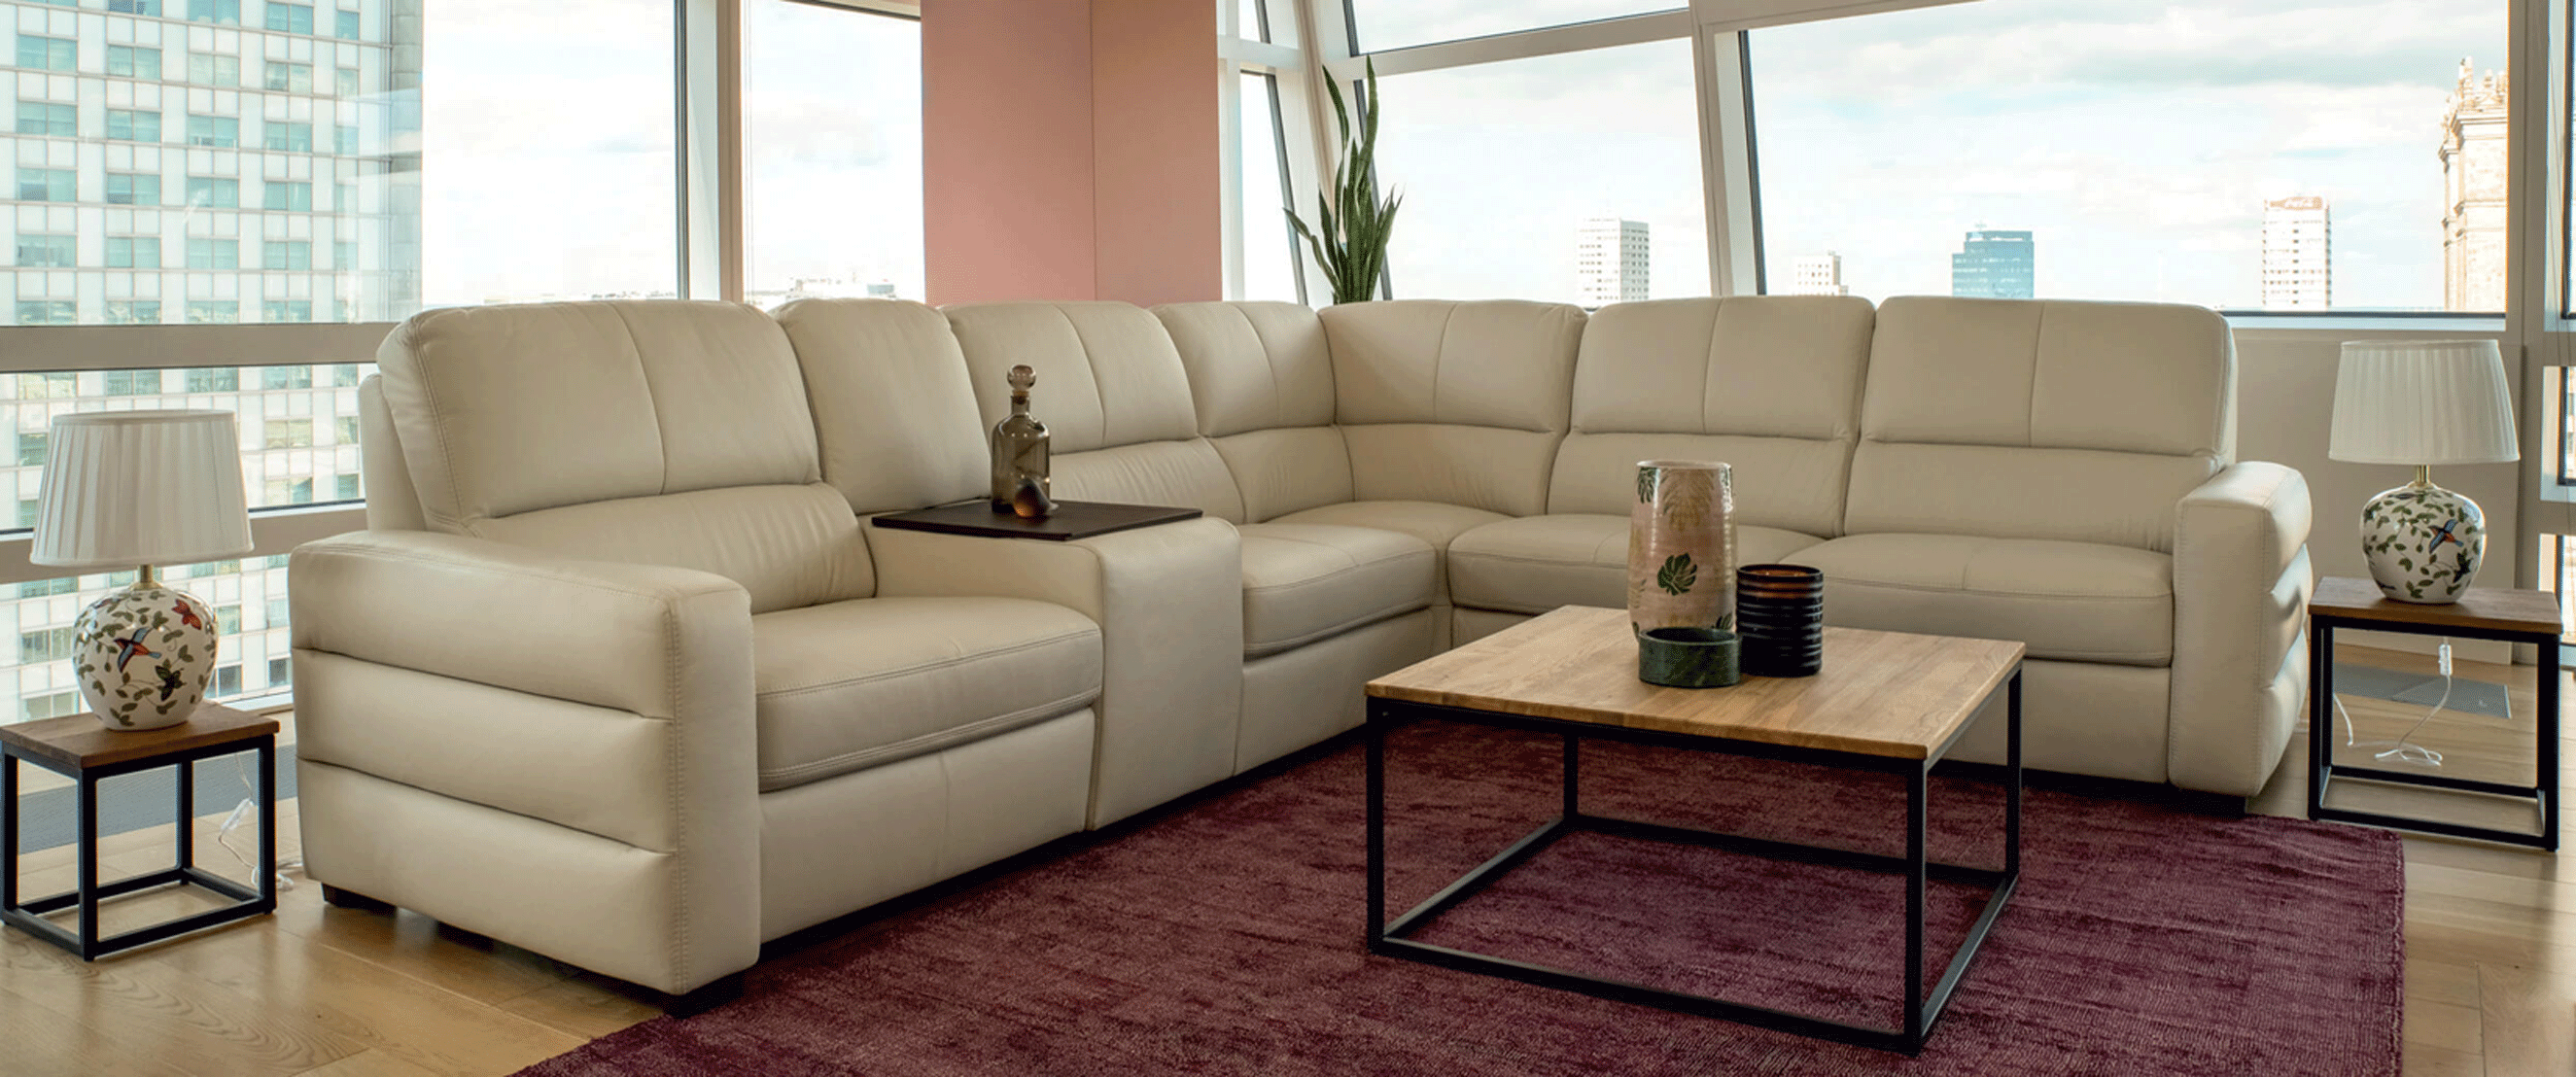 Living Room Furniture Sleepers Sofas Loveseats and Chairs Karten Sectional